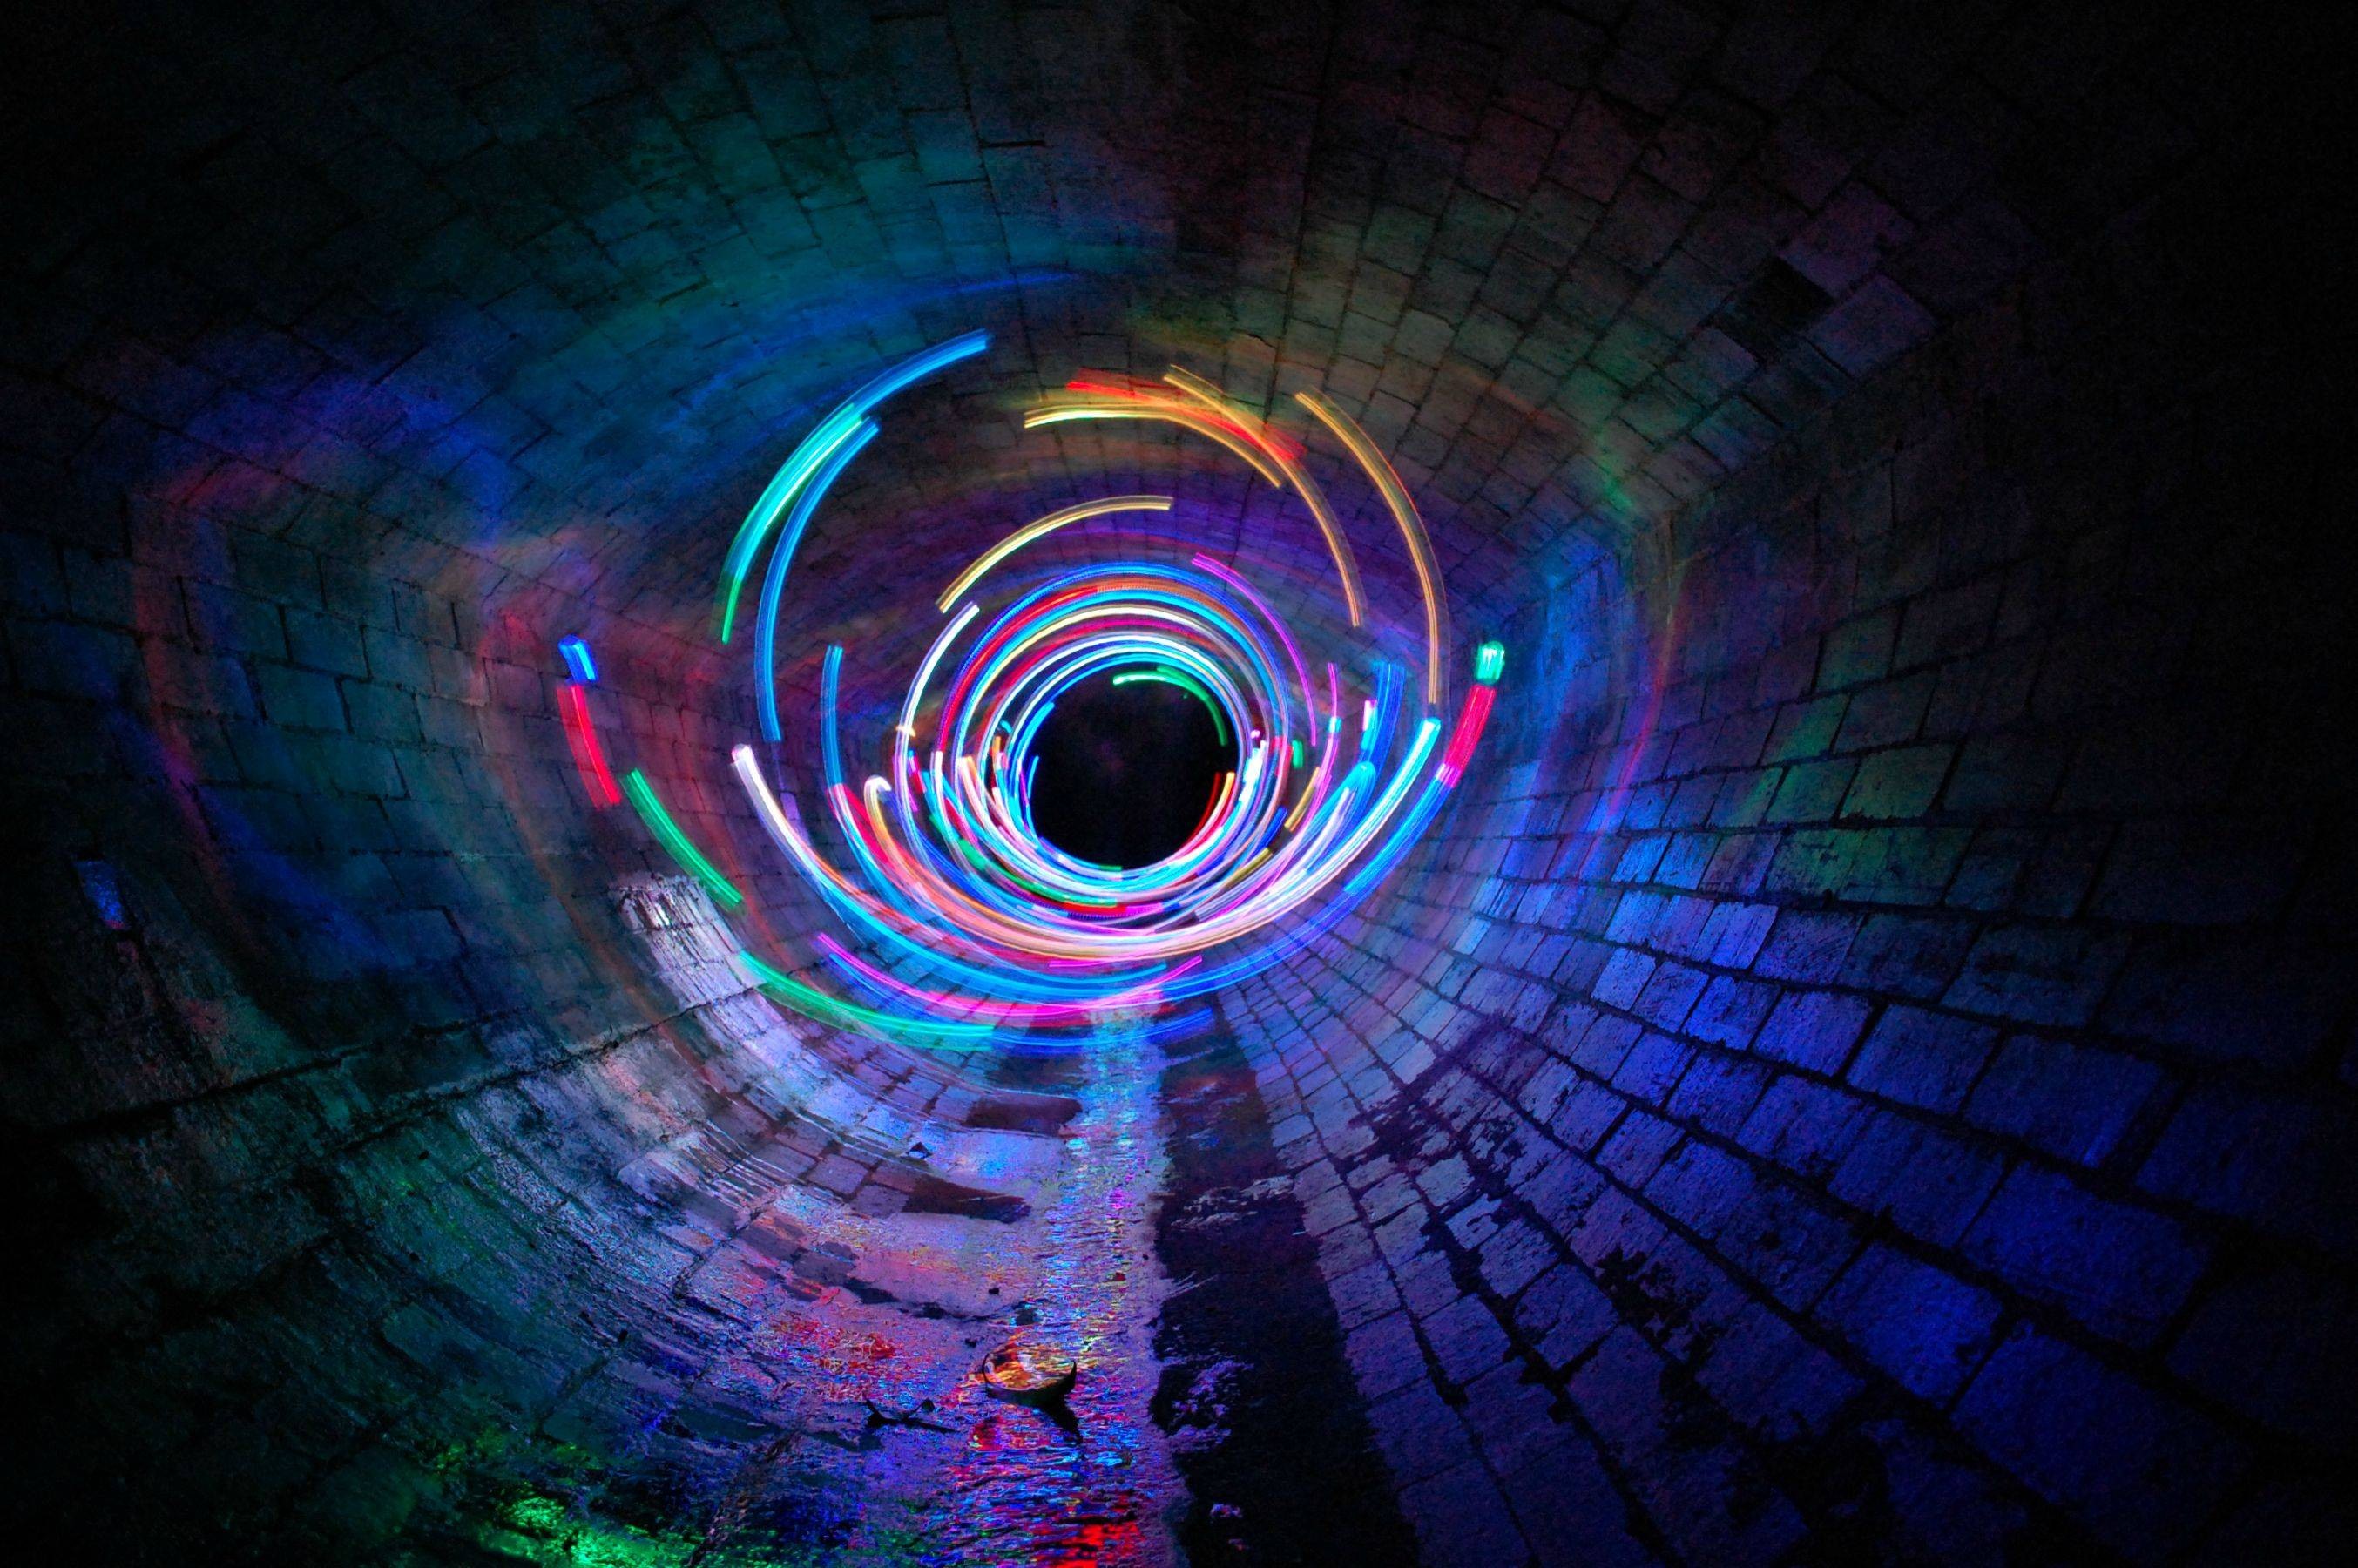 Long Exposure Sewers Light Painting Tunnel Digital Art Wall Shapes Lights Colorful 2707x1800